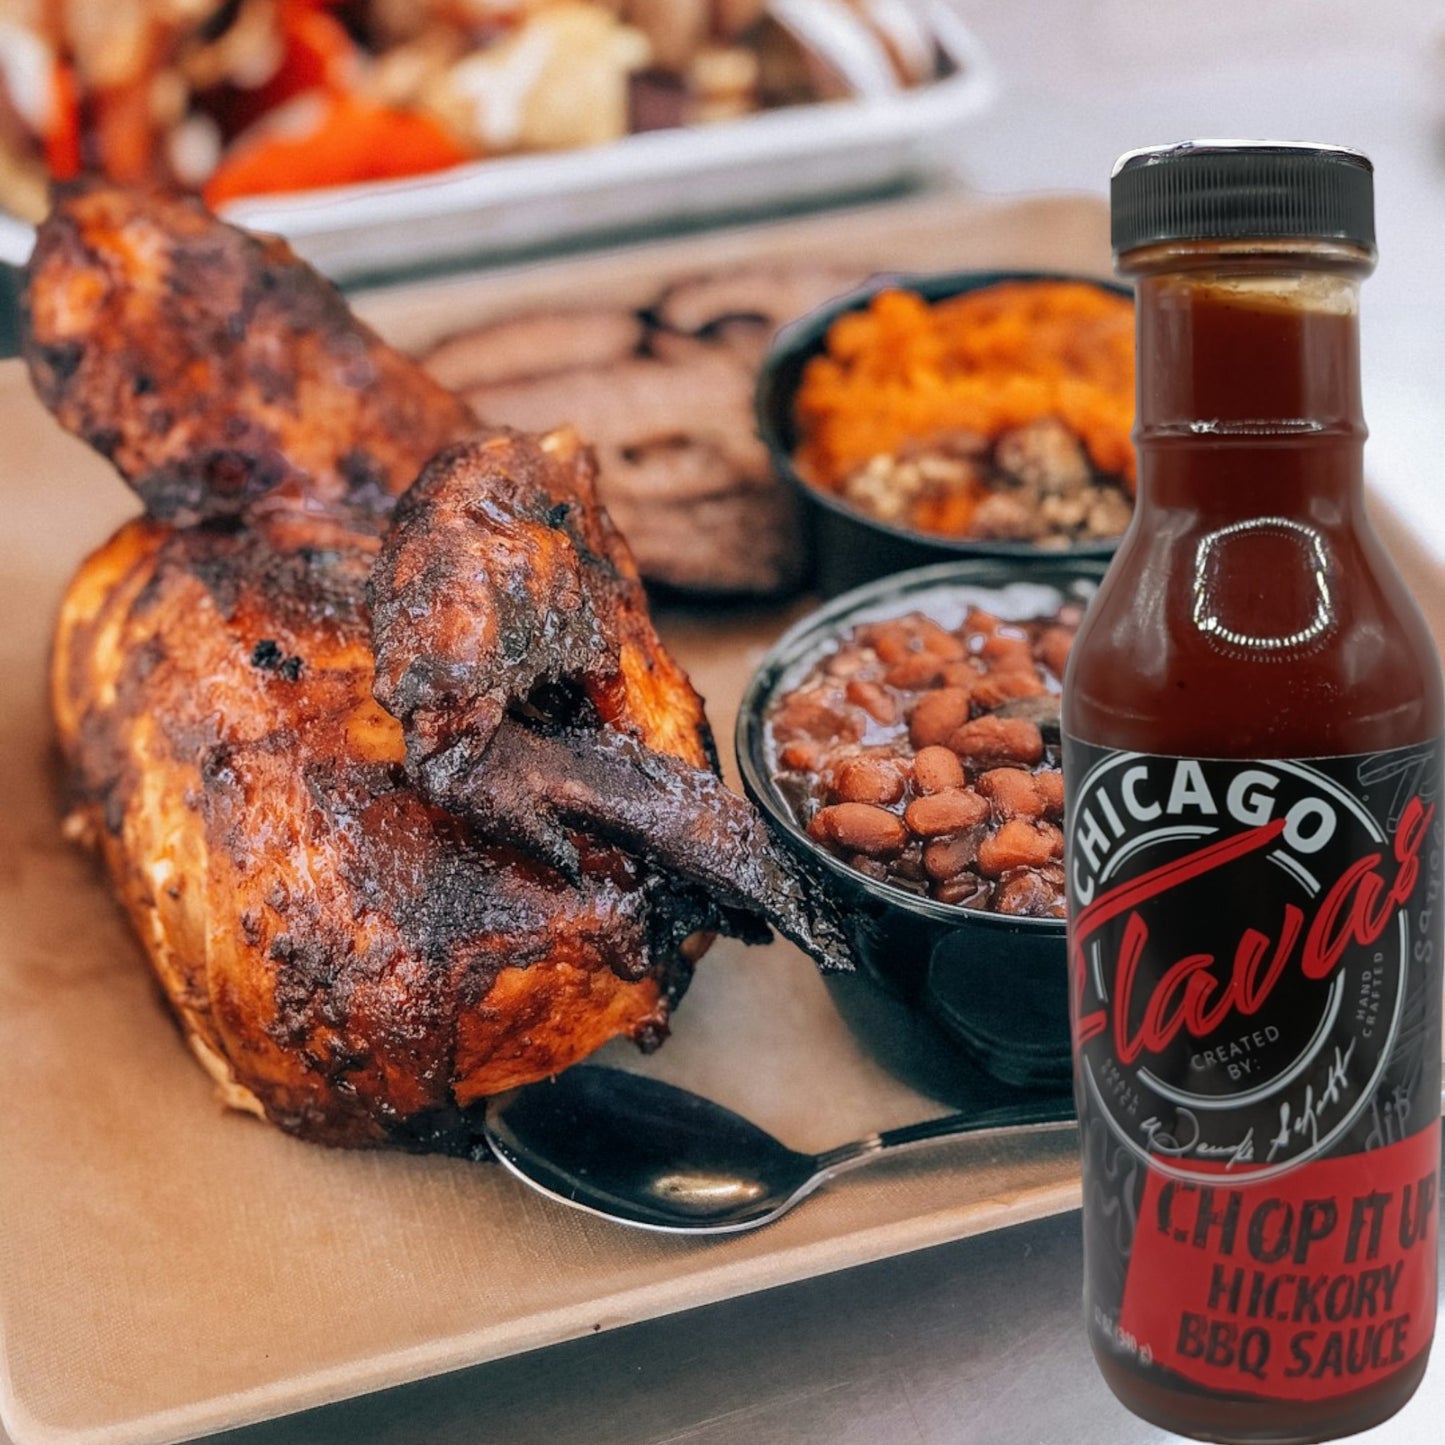 CHOP IT UP HICKORY BBQ SAUCE